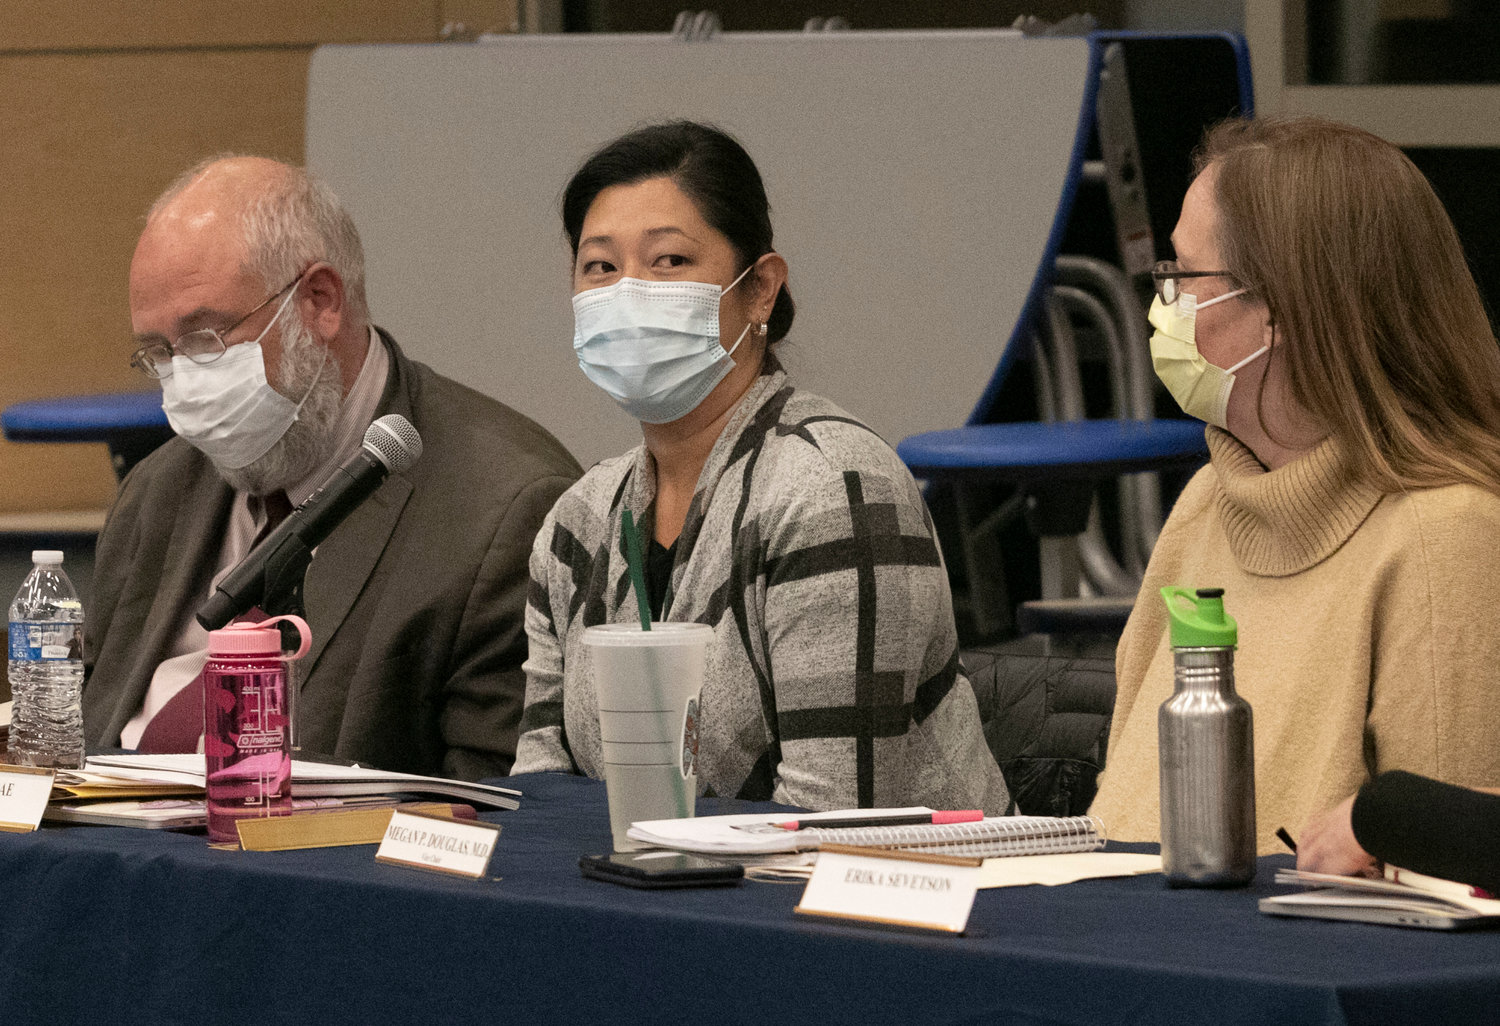 School committee chairwoman Gina Bae (center) speaks during Thursday night's pre-termination hearing. The committee voted 3-1 to fire three unvaccinated teachers.